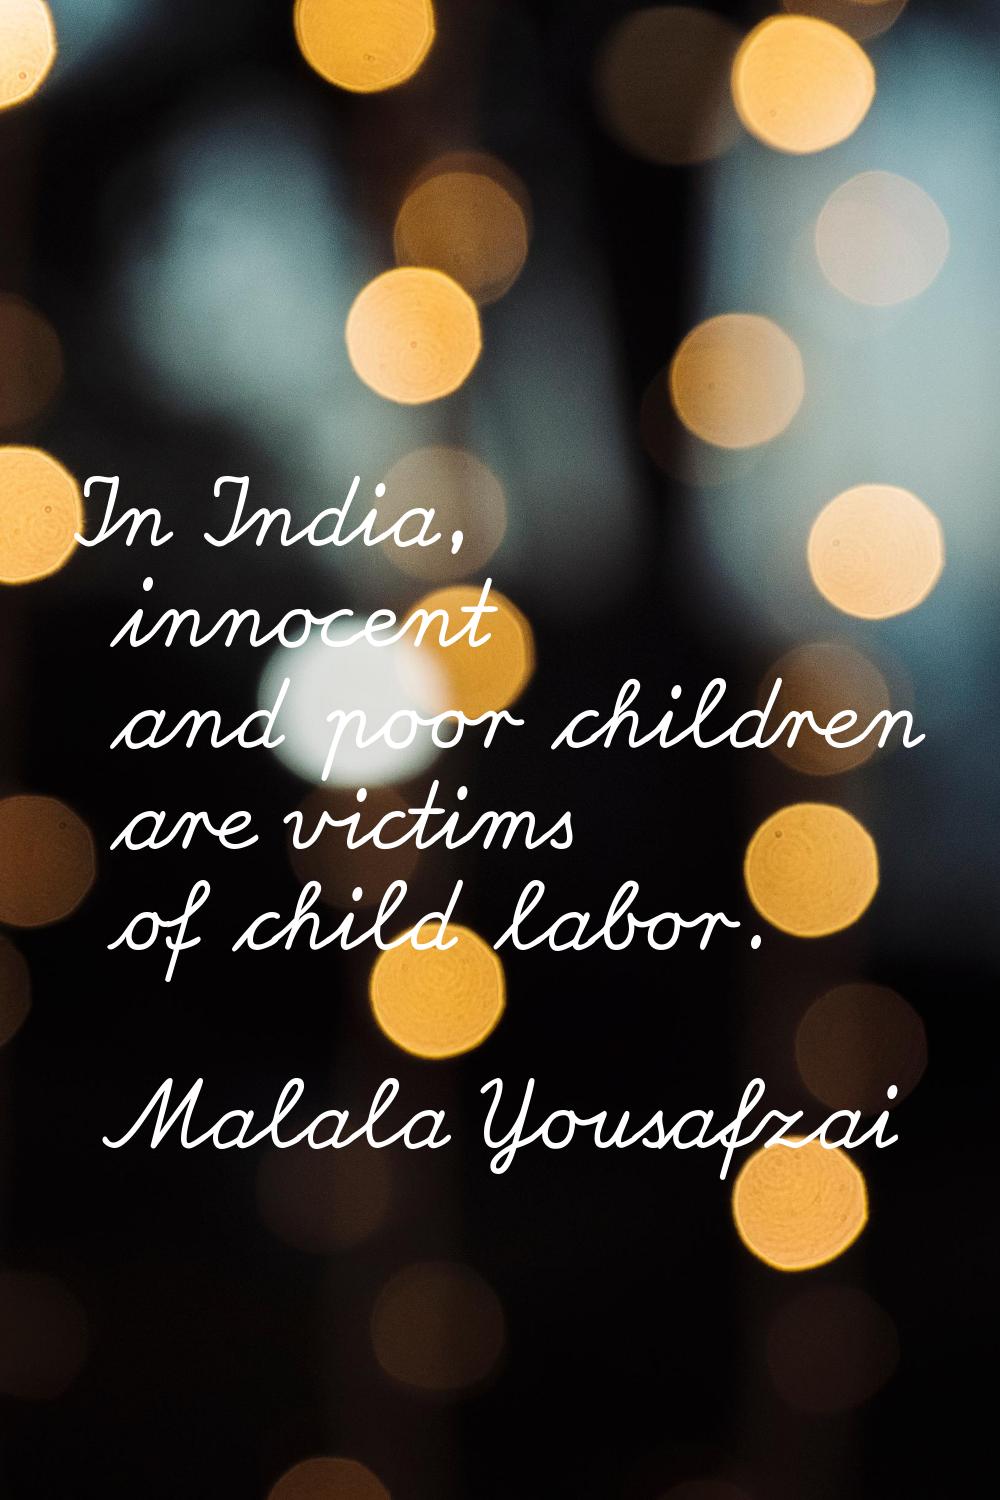 In India, innocent and poor children are victims of child labor.